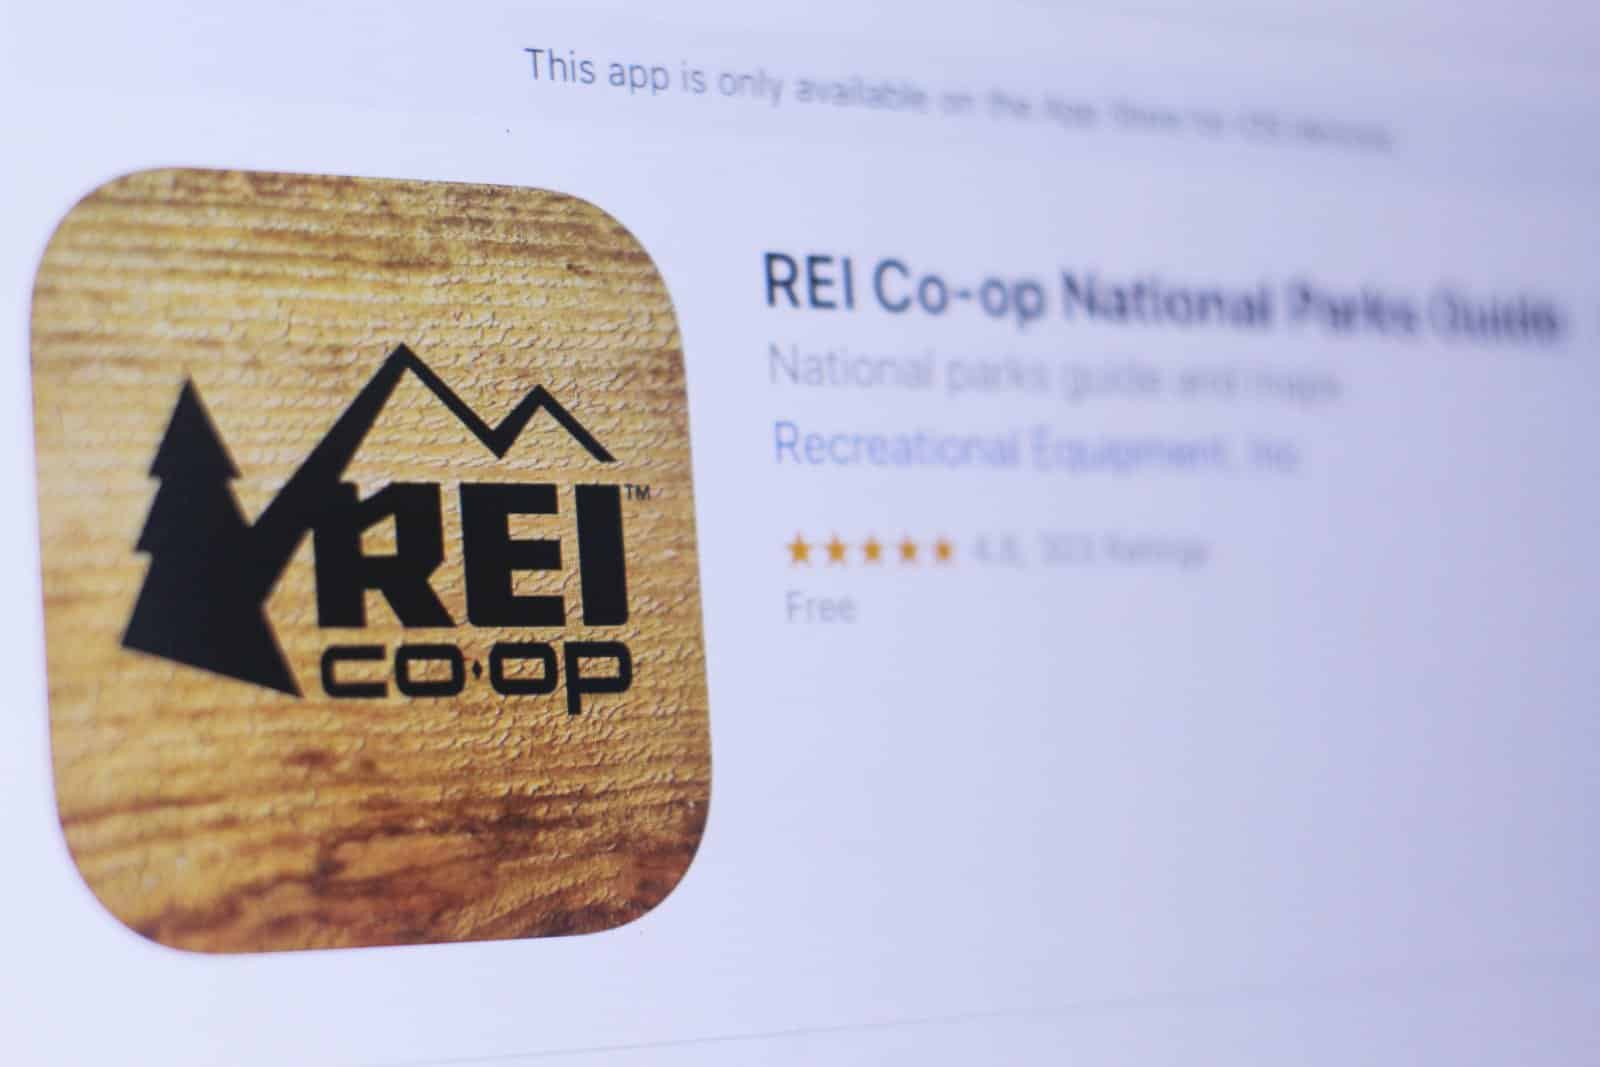 <p><span>The REI Co-op National Parks Guide is an indispensable tool for the eco-conscious explorer venturing into the U.S. national parks. This comprehensive app offers detailed maps, trail information, and sustainability tips for visiting these natural wonders.</span></p> <p><span>It ensures that your natural adventures are respectful and informed, helping you enjoy the parks responsibly while minimizing your environmental impact.</span></p> <p><b>Insider’s Tip: </b><span>Utilize the app’s offline feature to access park information without needing mobile data or Wi-Fi.</span><span>12.</span></p>